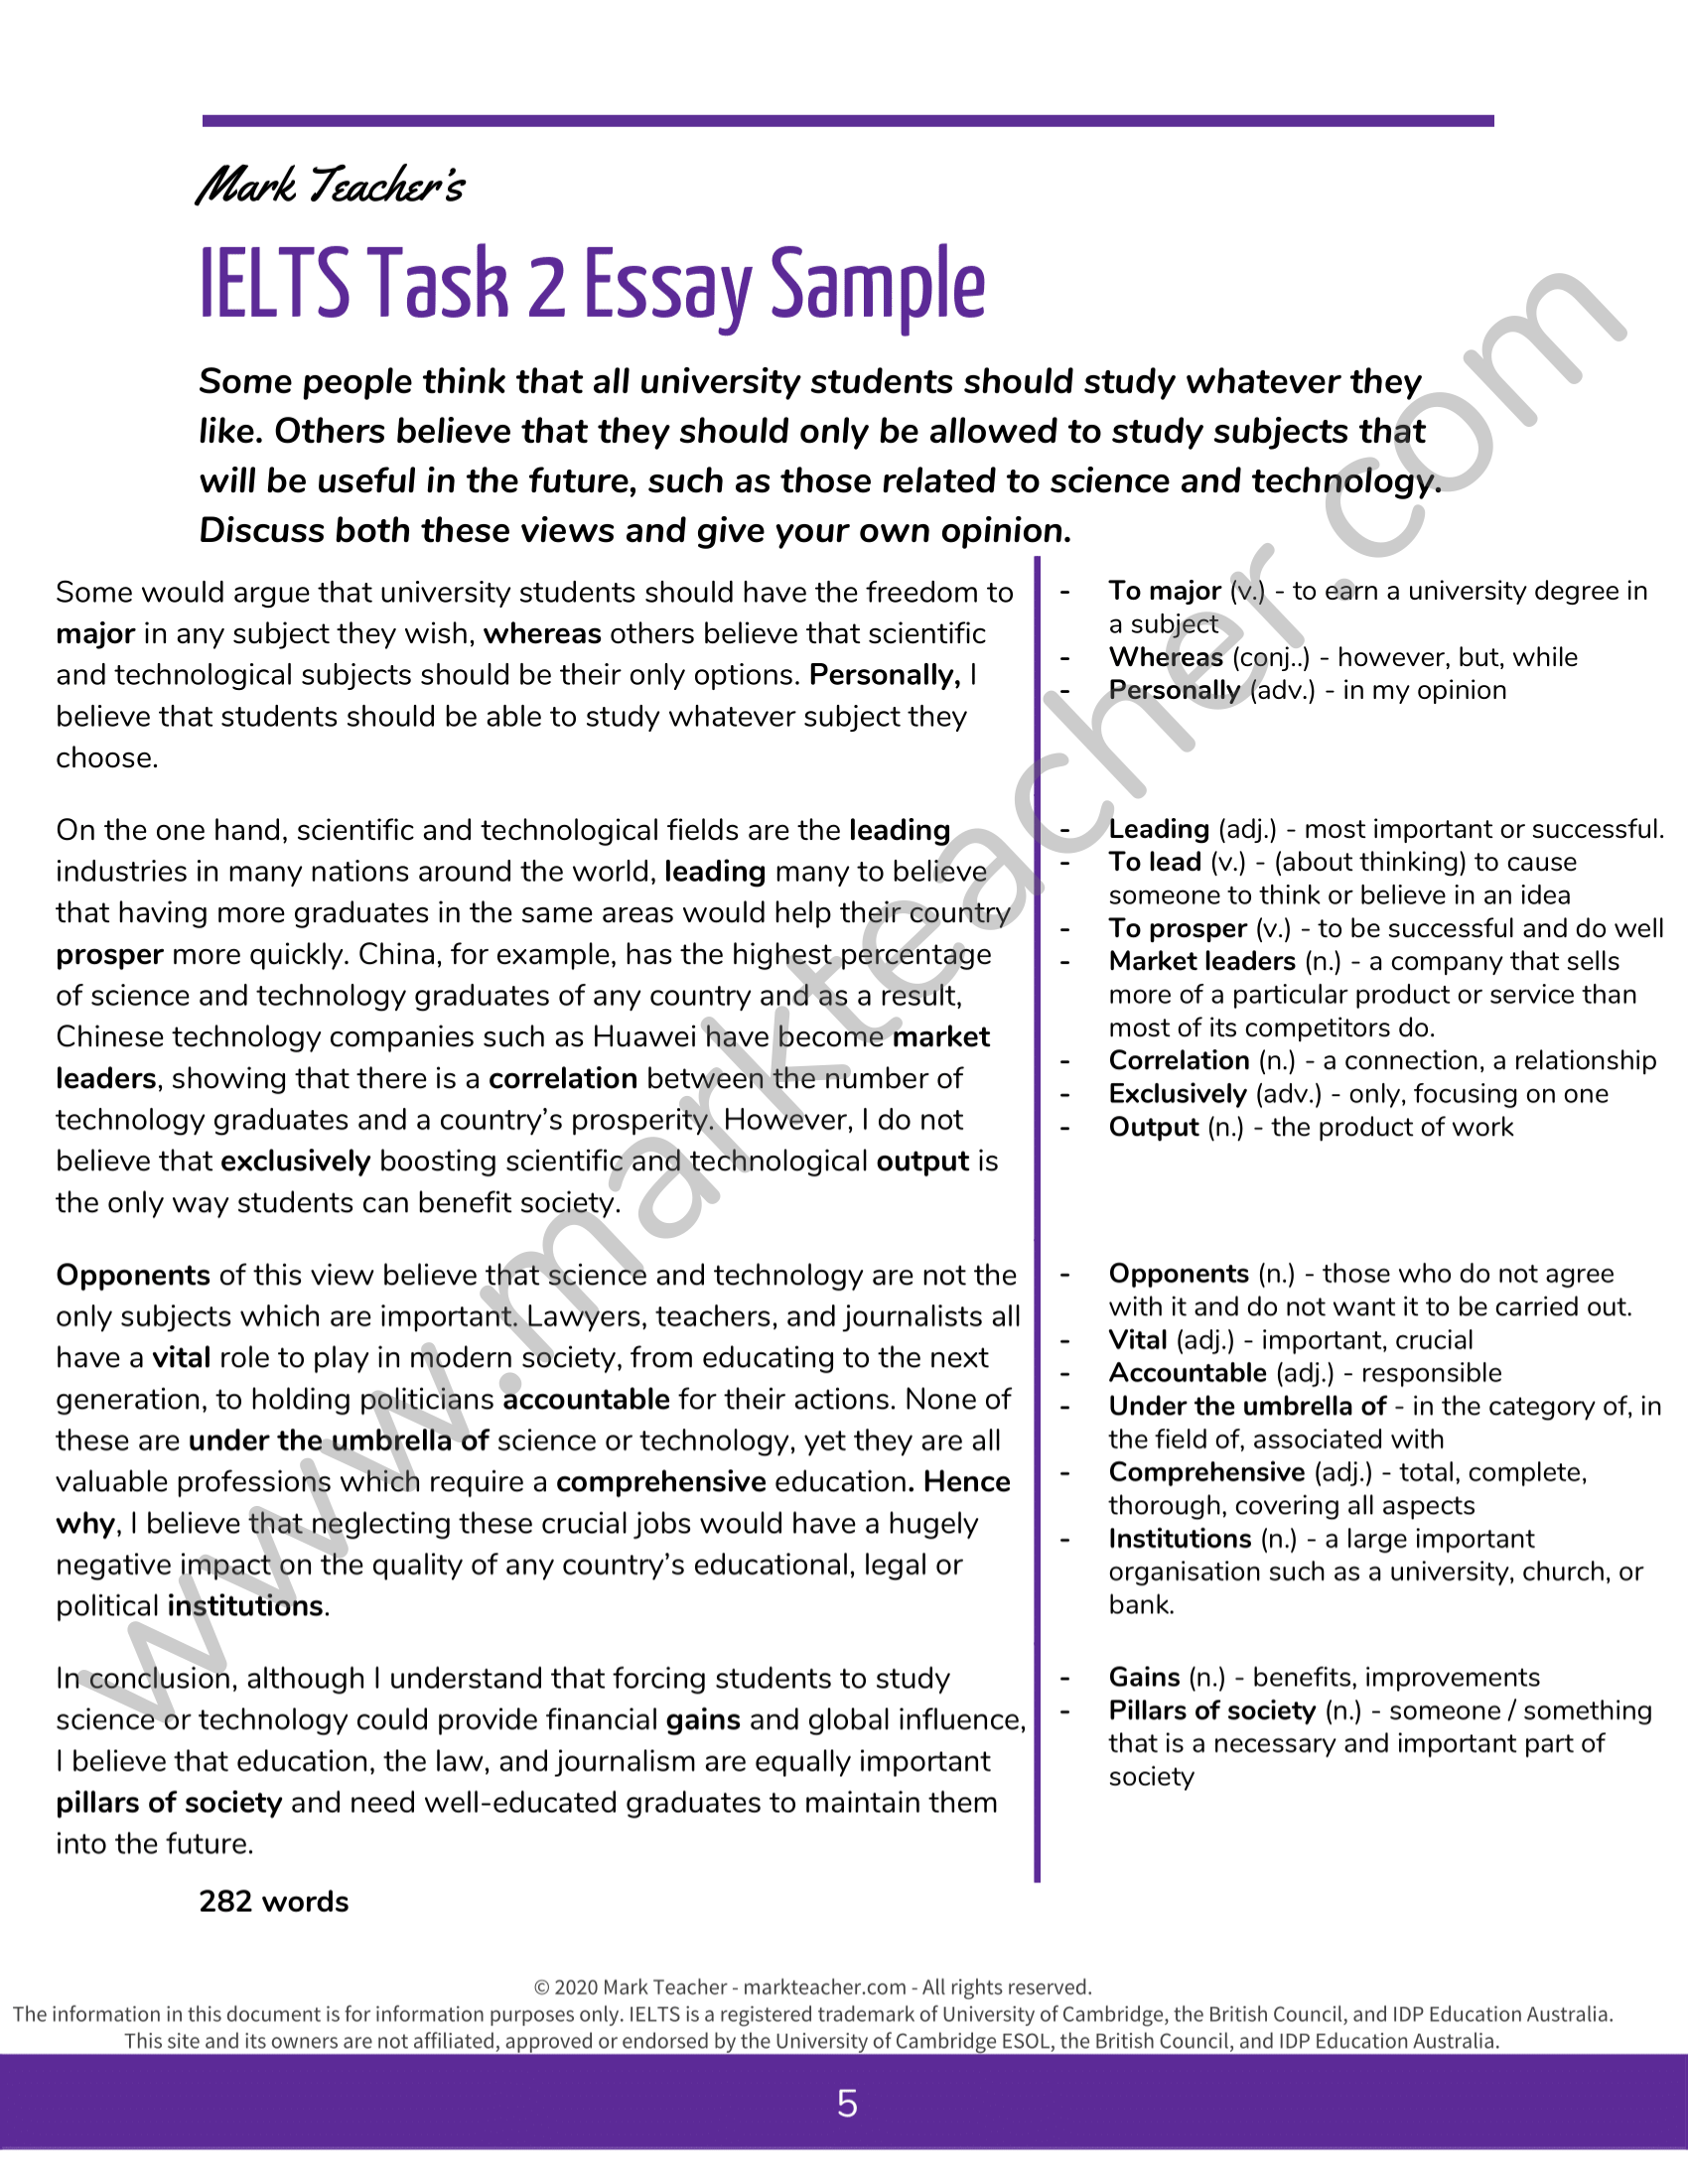 IELTS Writing Task 25 Sample Essay - Subject Choices for University